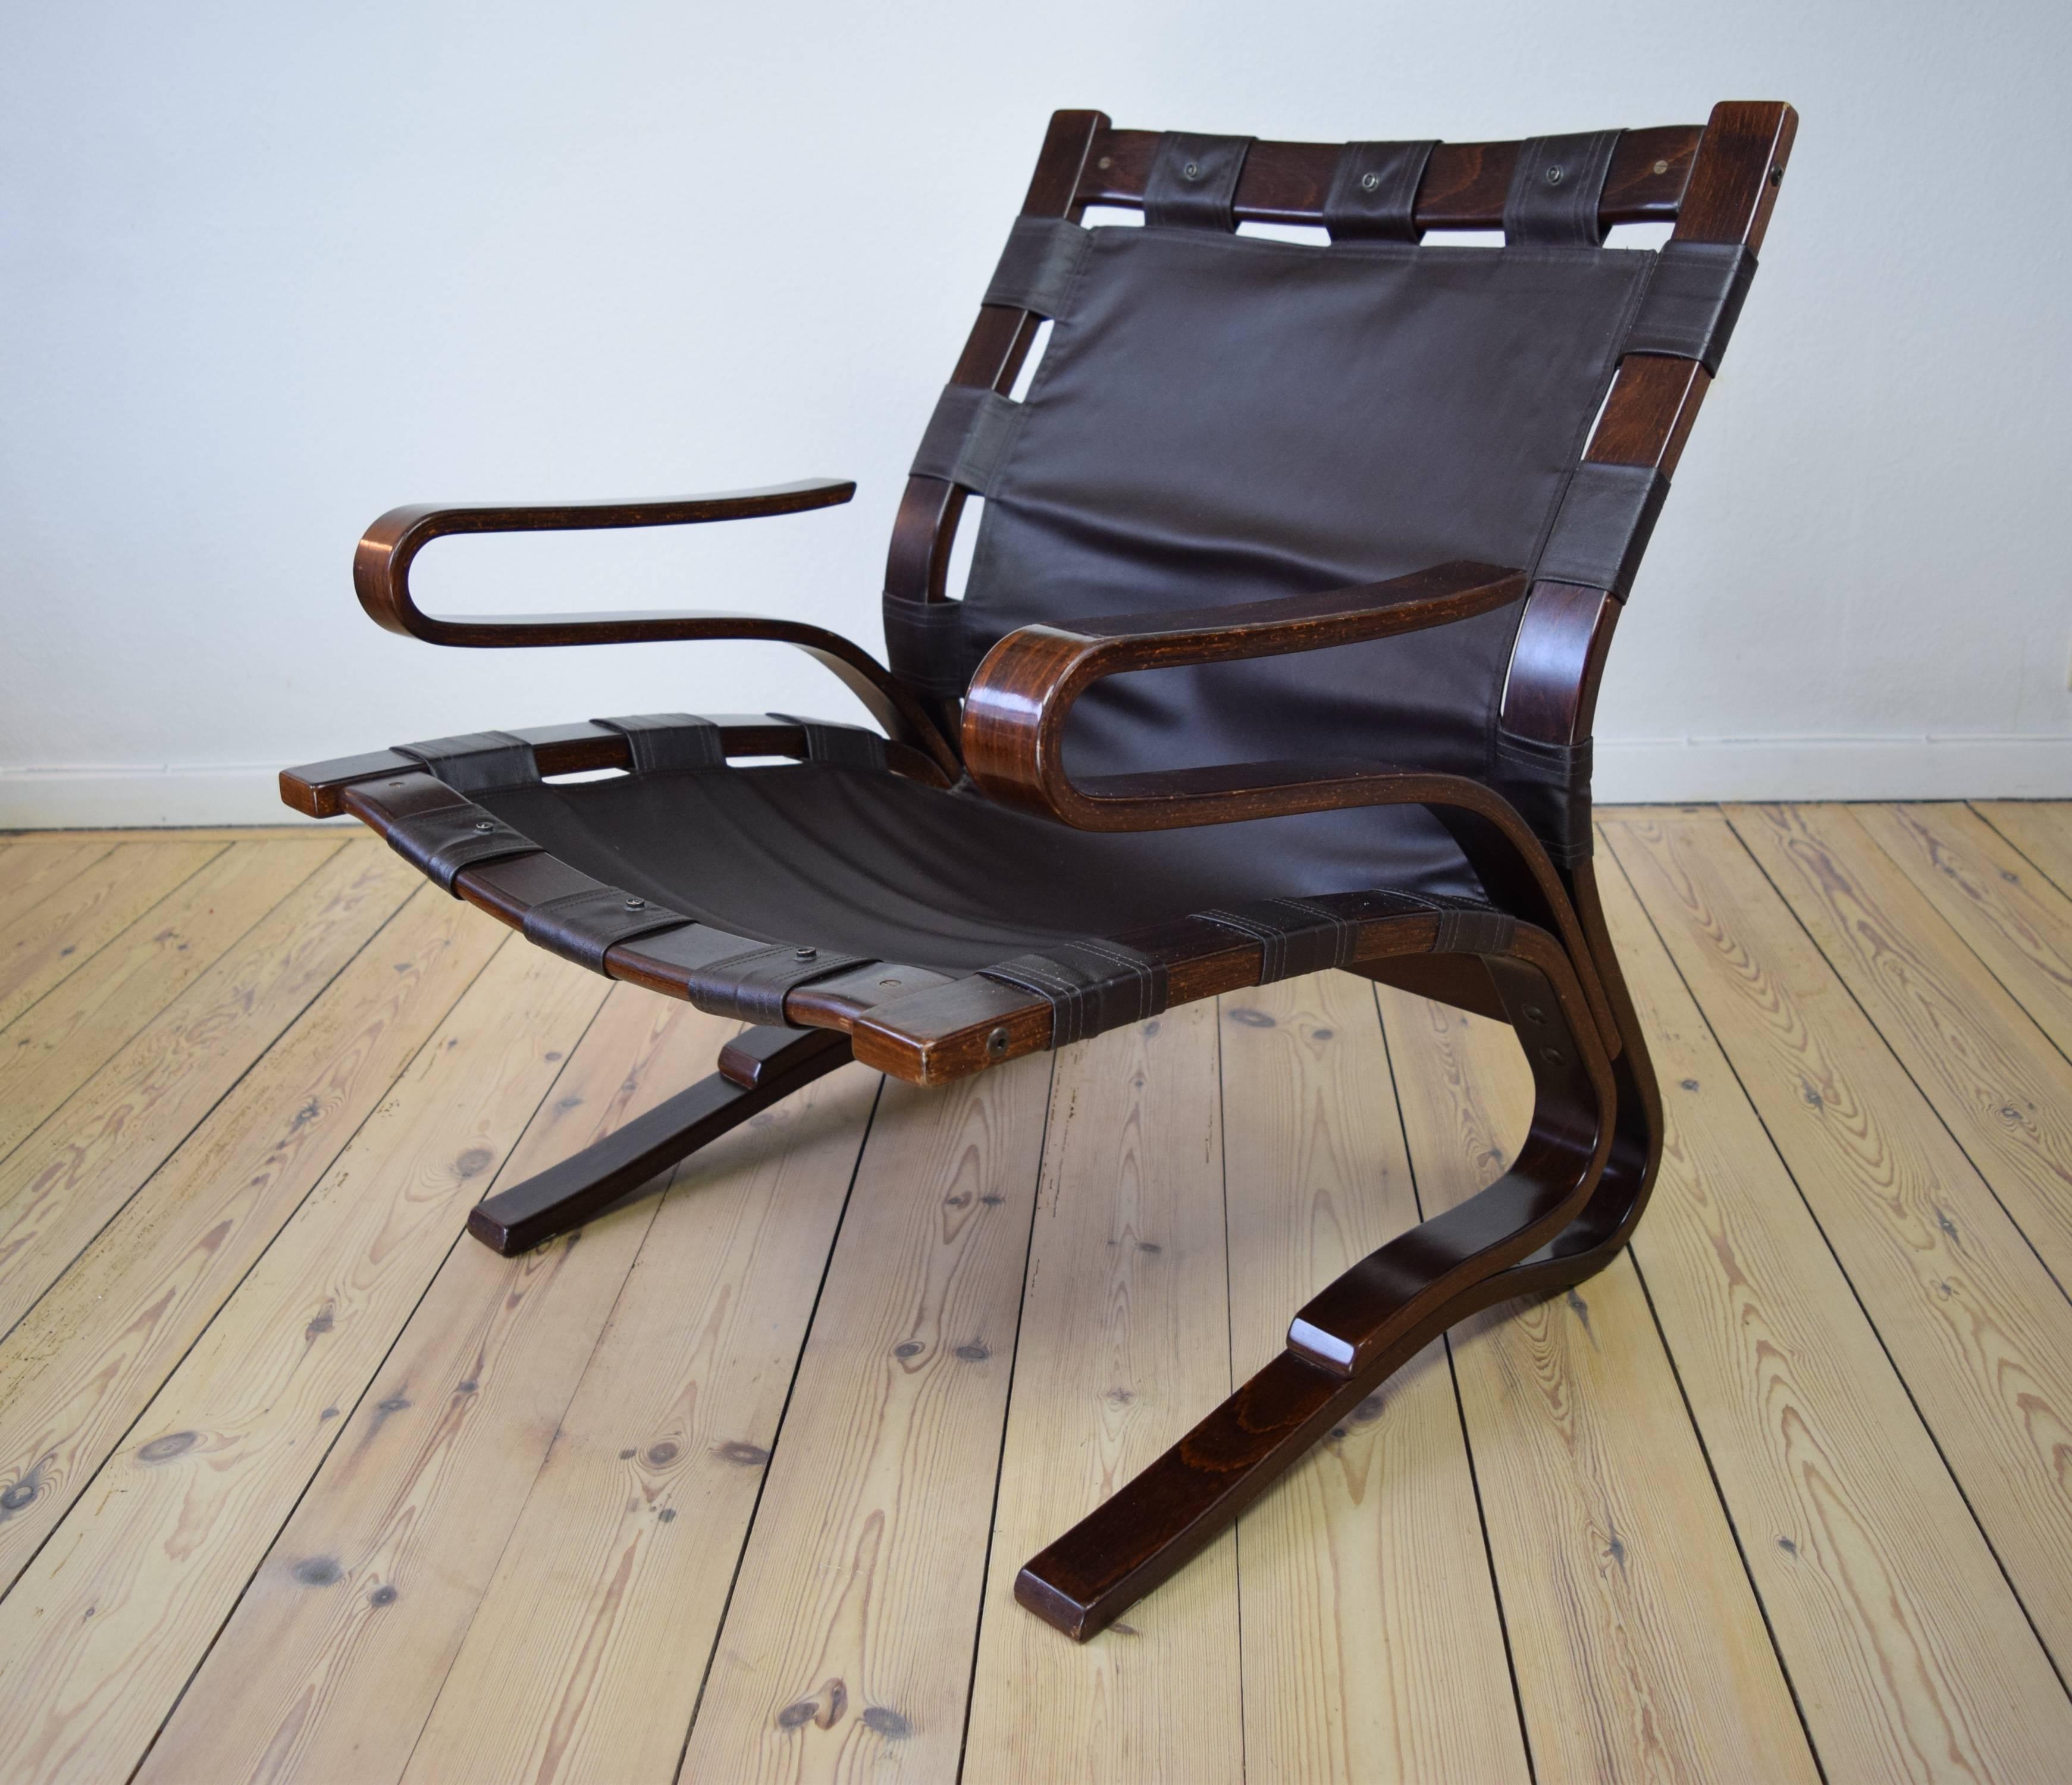 Elsa & Nordahl Solheim leather  Pirate chairs, 1973. The leather cushion rests on a heavy duty synthetic canvas which is looped and sewn over the laminated rosewood frame. From a design first shown at the Scandinavian furniture fair in